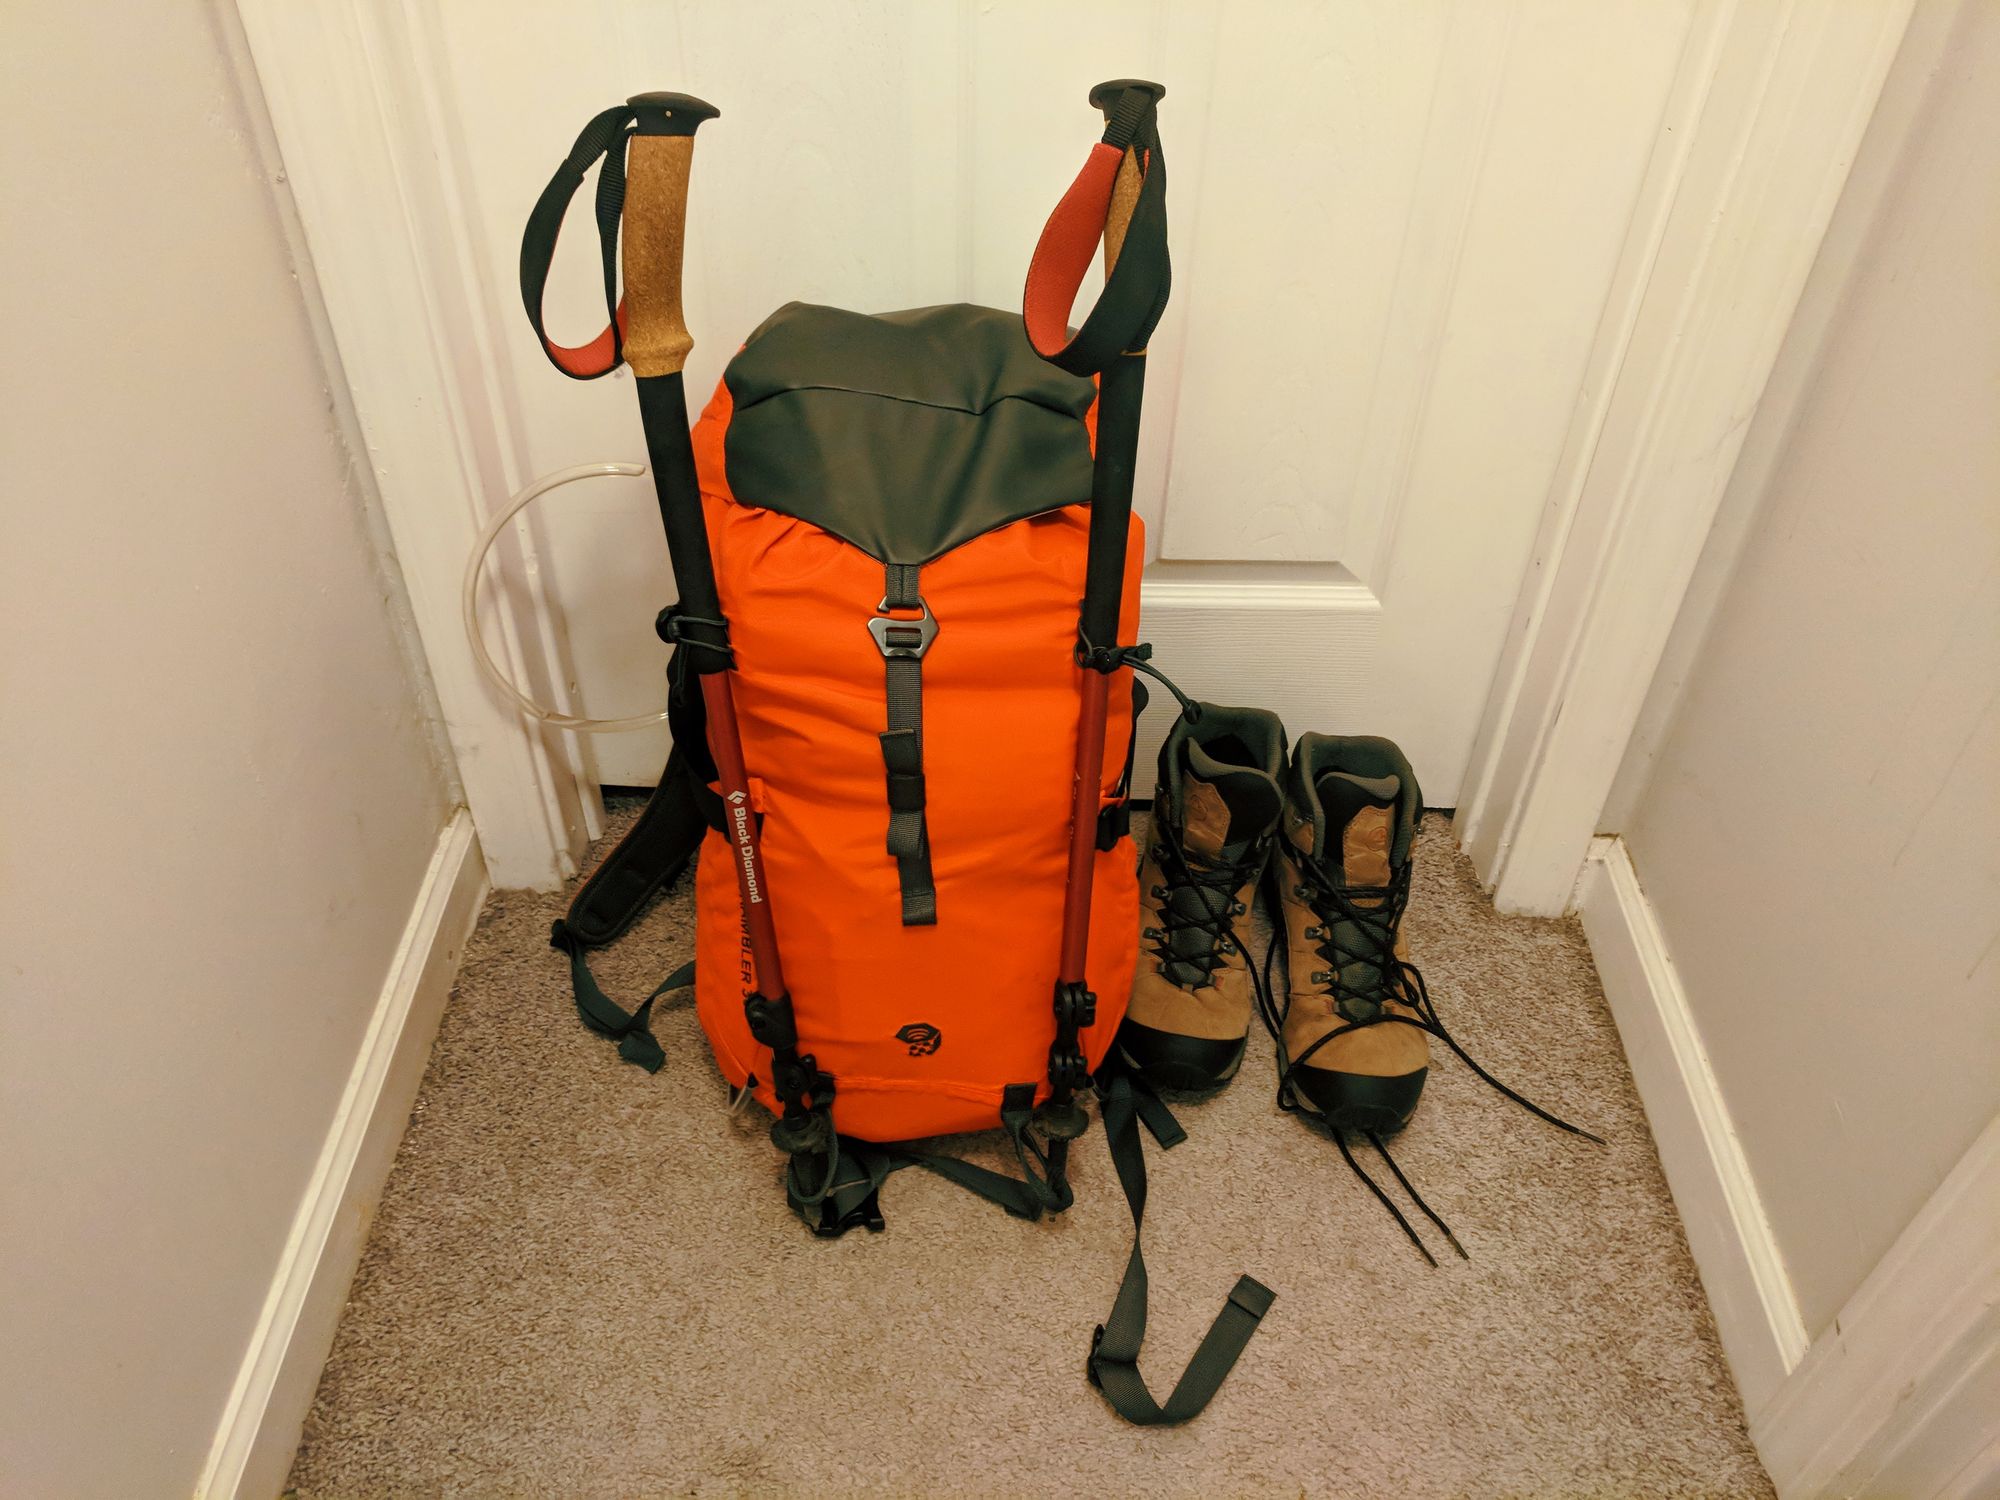 Some Notes on Ultralight Packing